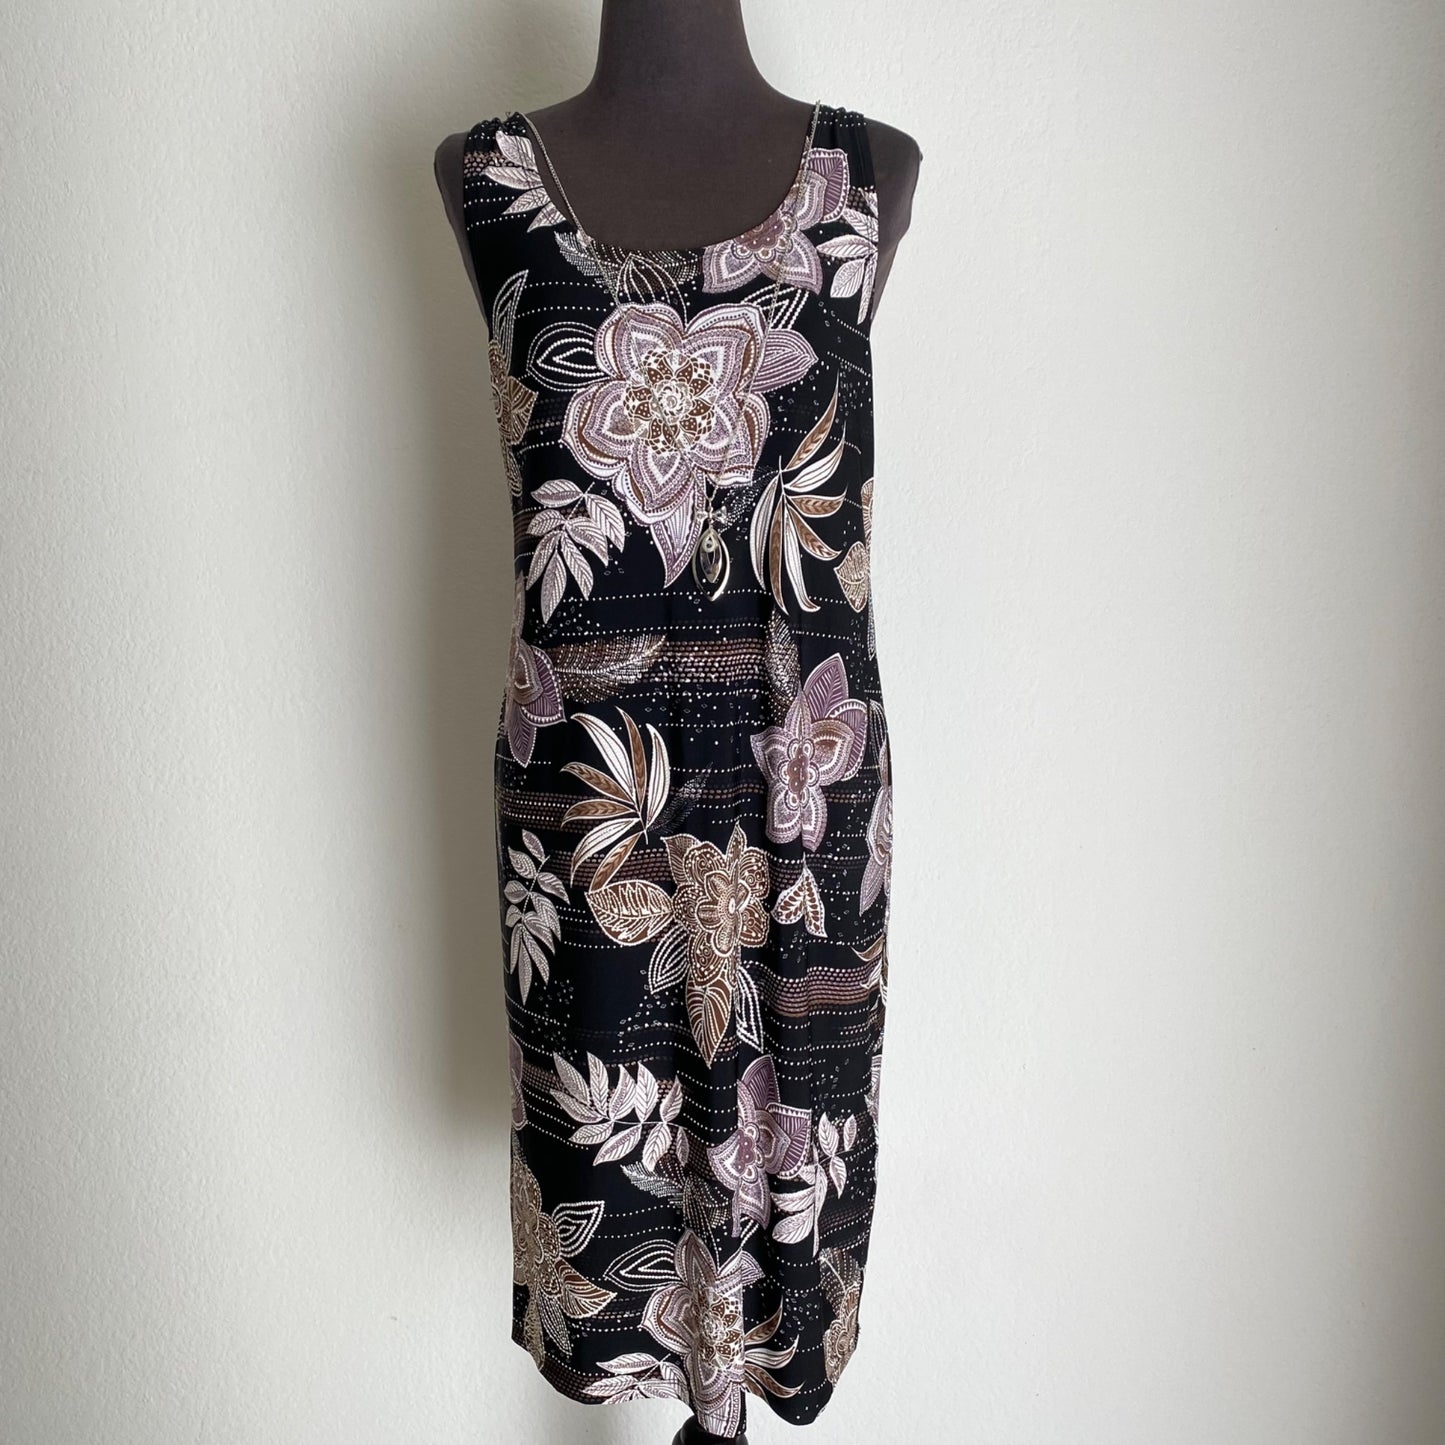 R&M Richards sz 6 floral shift midi dress with silver necklace NWT (Dress only)